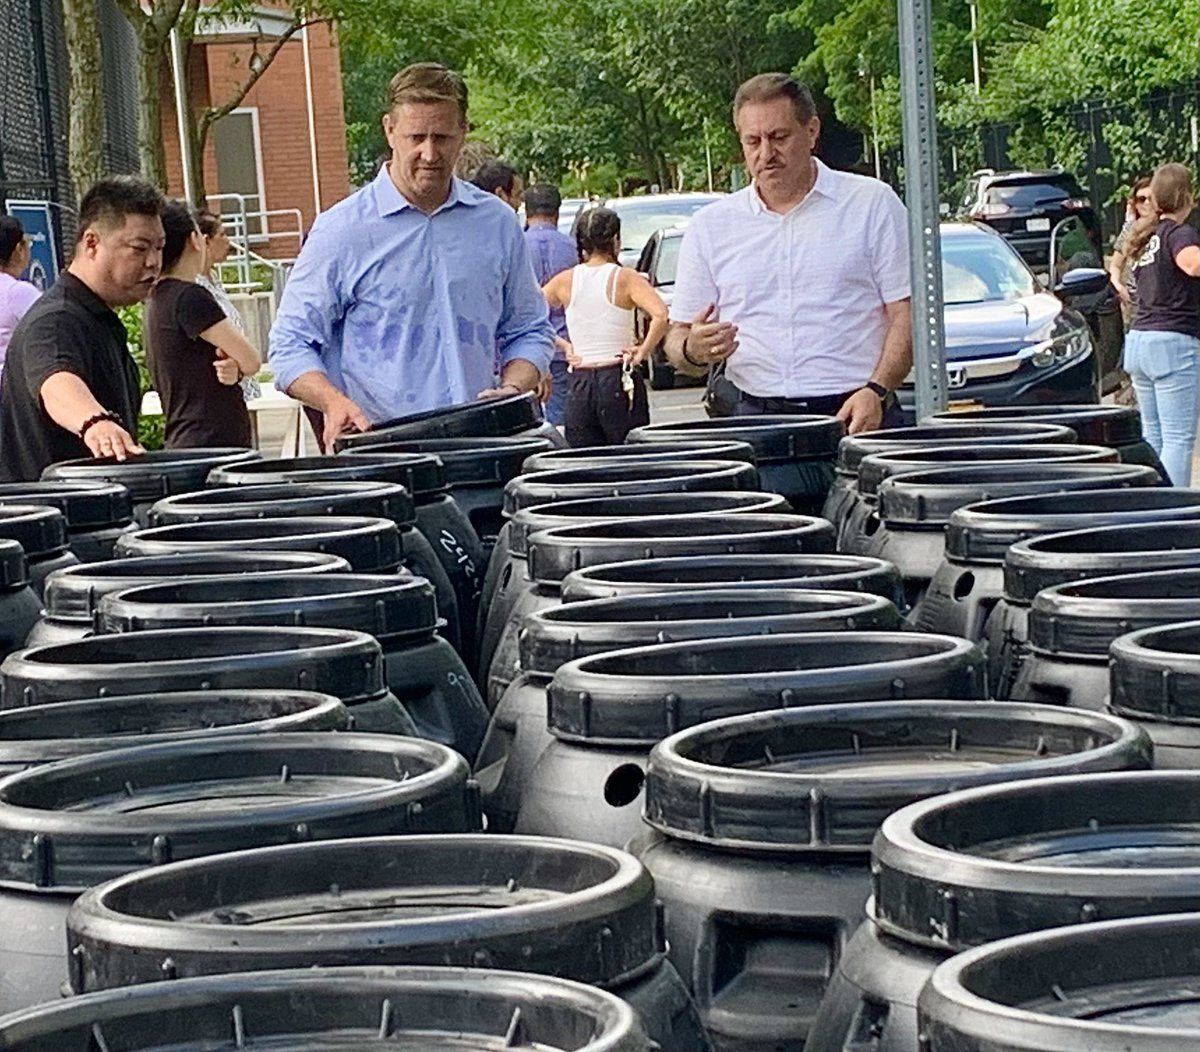 Always a great time partnering w my friend @AndrewHevesi, my office team and NYC DEP handing out rain barrels to constituents in #ForestHills